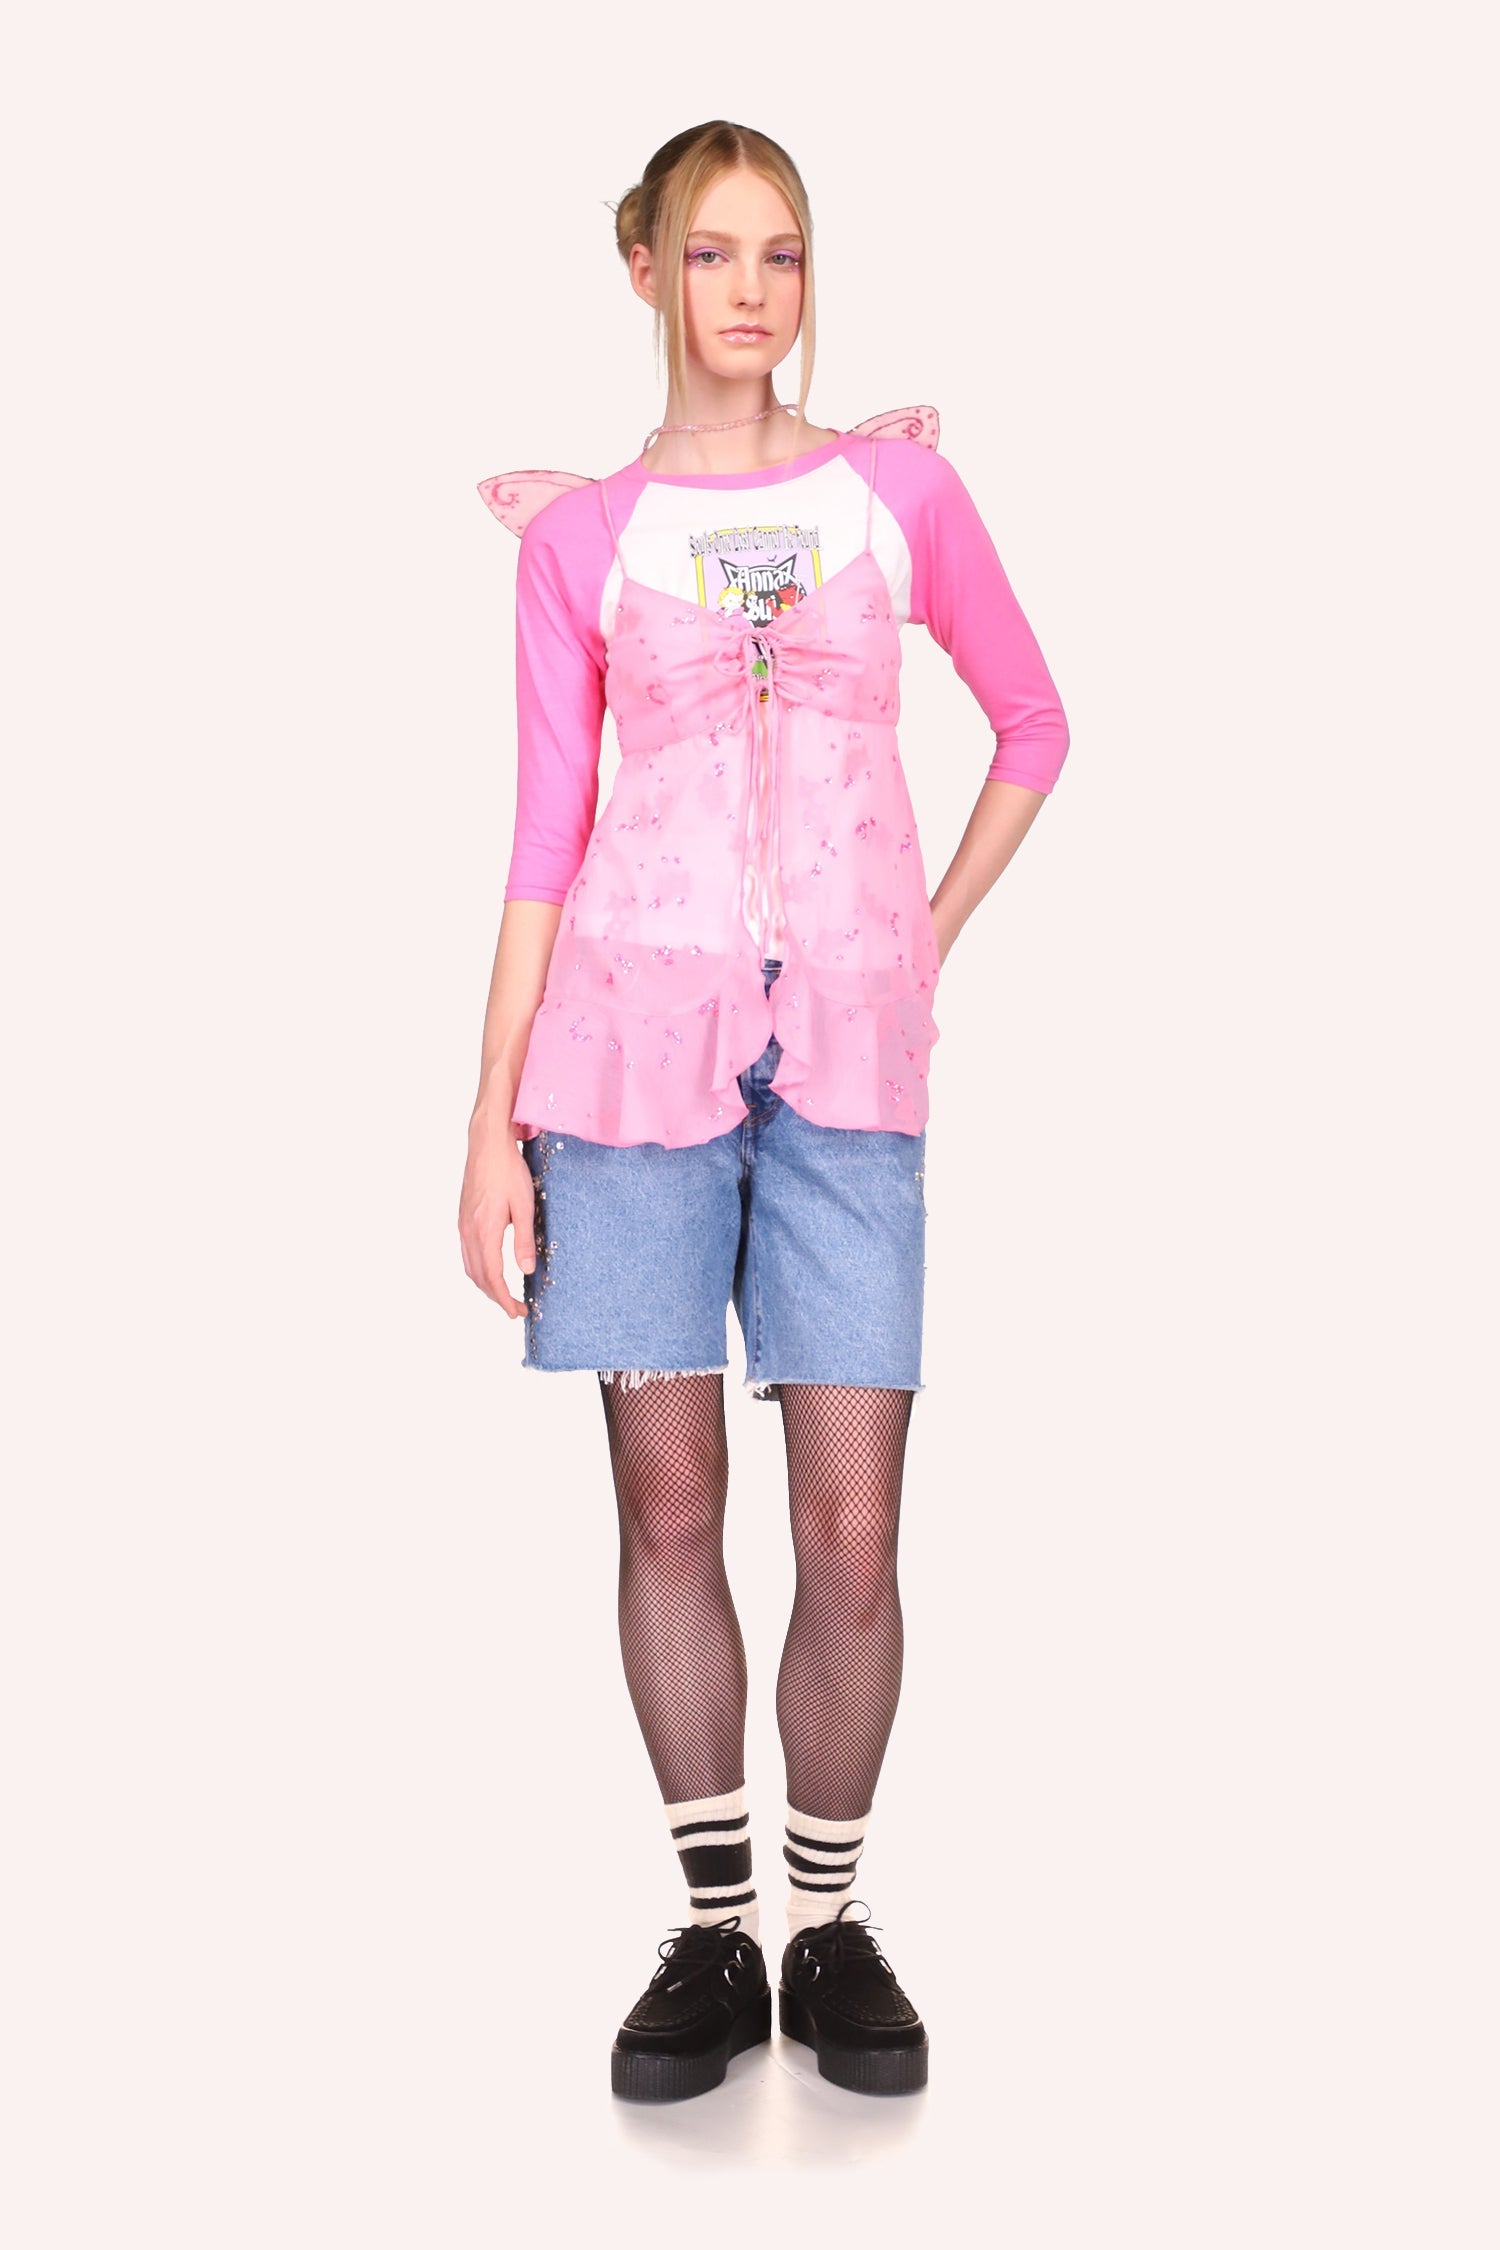 uiUnholy Ground Ringer Tee Pink Multi is wearer under an Anna Sui Flock Crinkle Chiffon Tank Pink